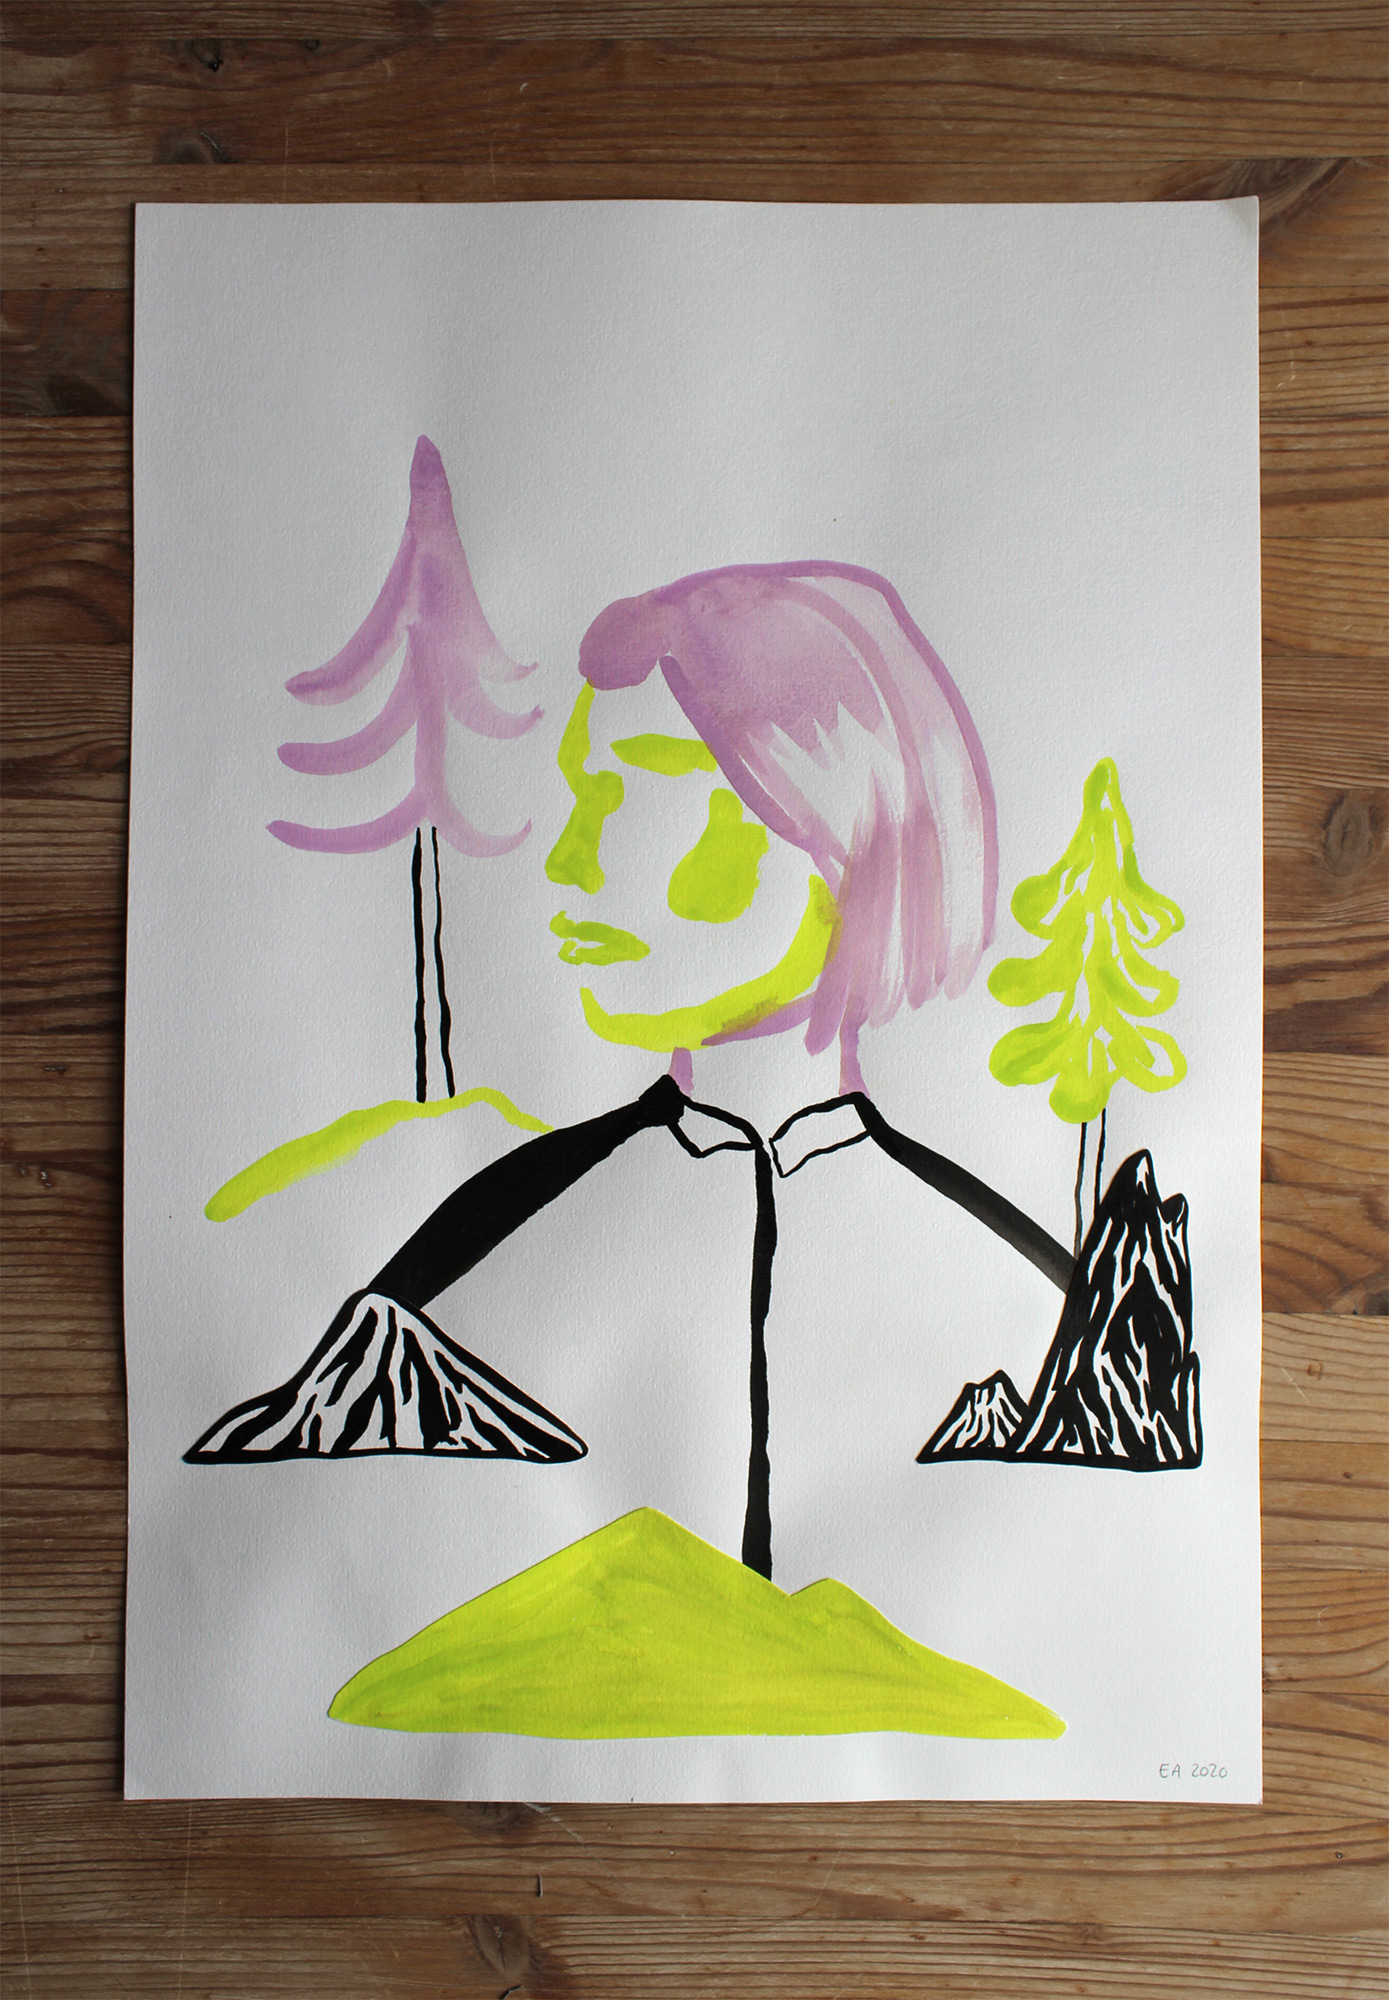 drawings, gouache-painting, watercolor-paintings, aesthetic, graphical, minimalistic, pop, animals, botany, nature, people, black, green, violet, gouache, ink, paper, beautiful, danish, decorative, design, forest, interior, interior-design, modern, modern-art, mountains, nordic, posters, pretty, prints, scandinavien, trees, Buy original high quality art. Paintings, drawings, limited edition prints & posters by talented artists.